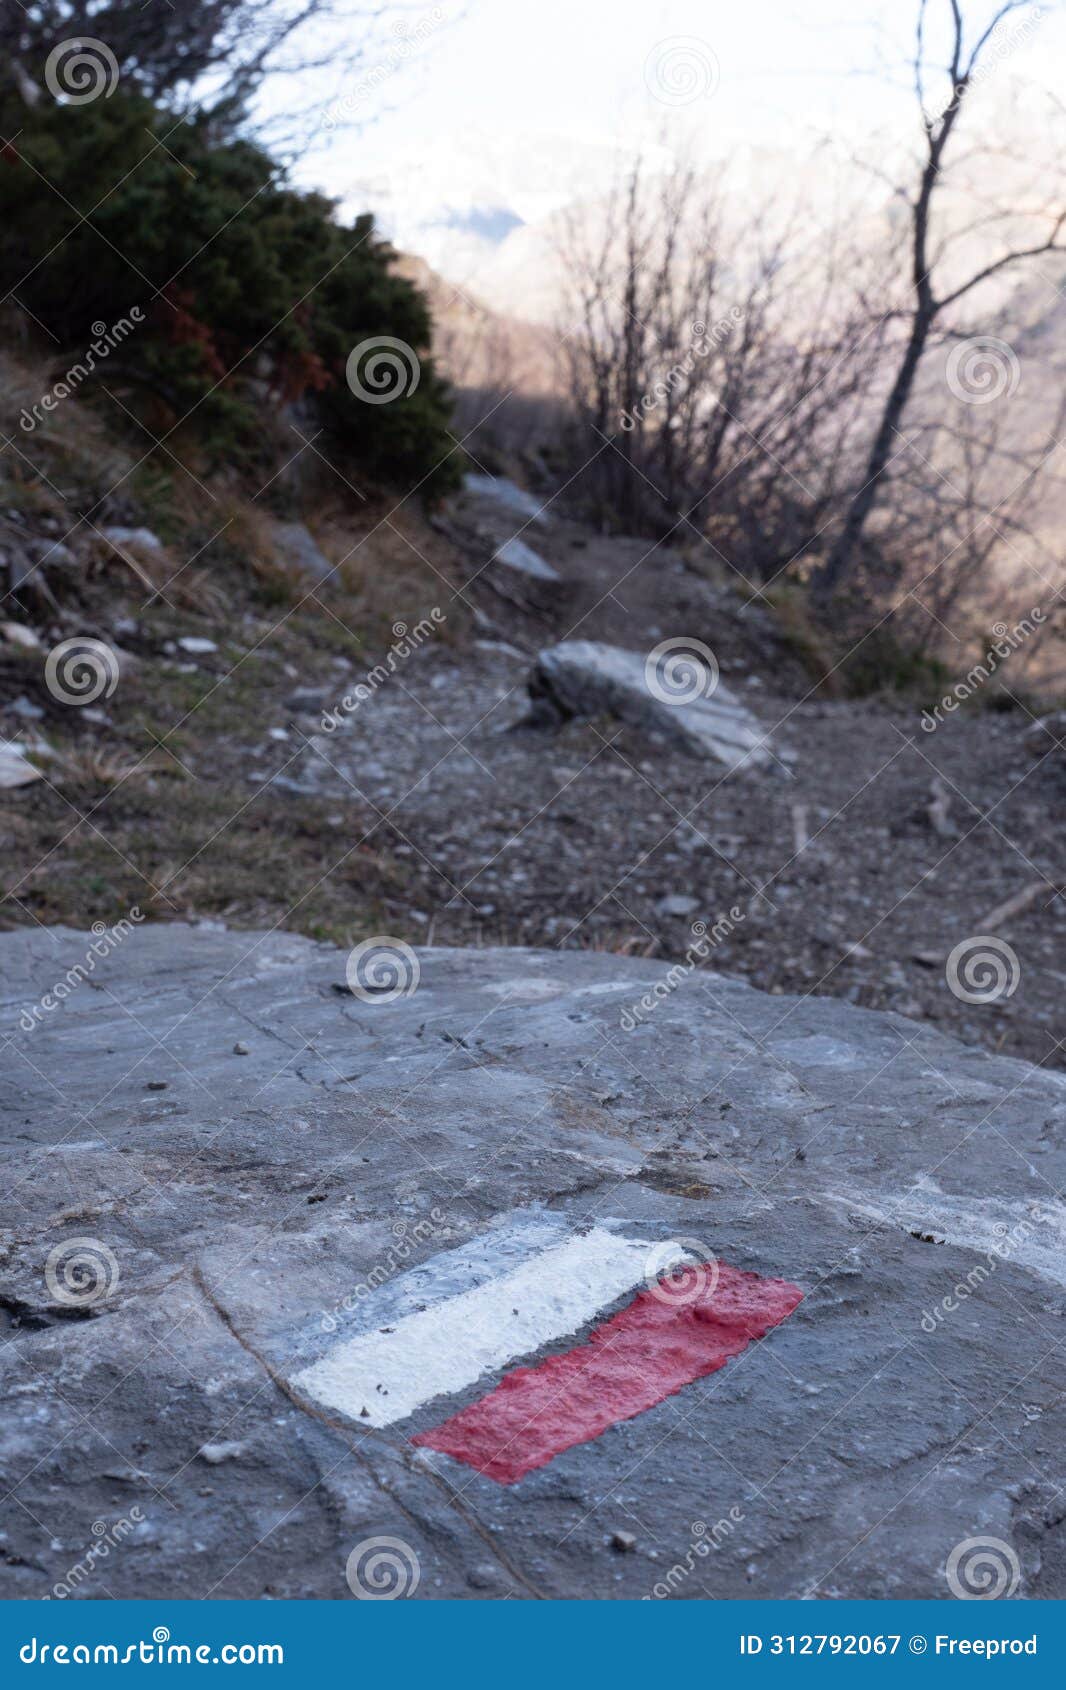 marking of a long-distance hiking route, white and red, itineraries in france, marking on rock, hiking trail